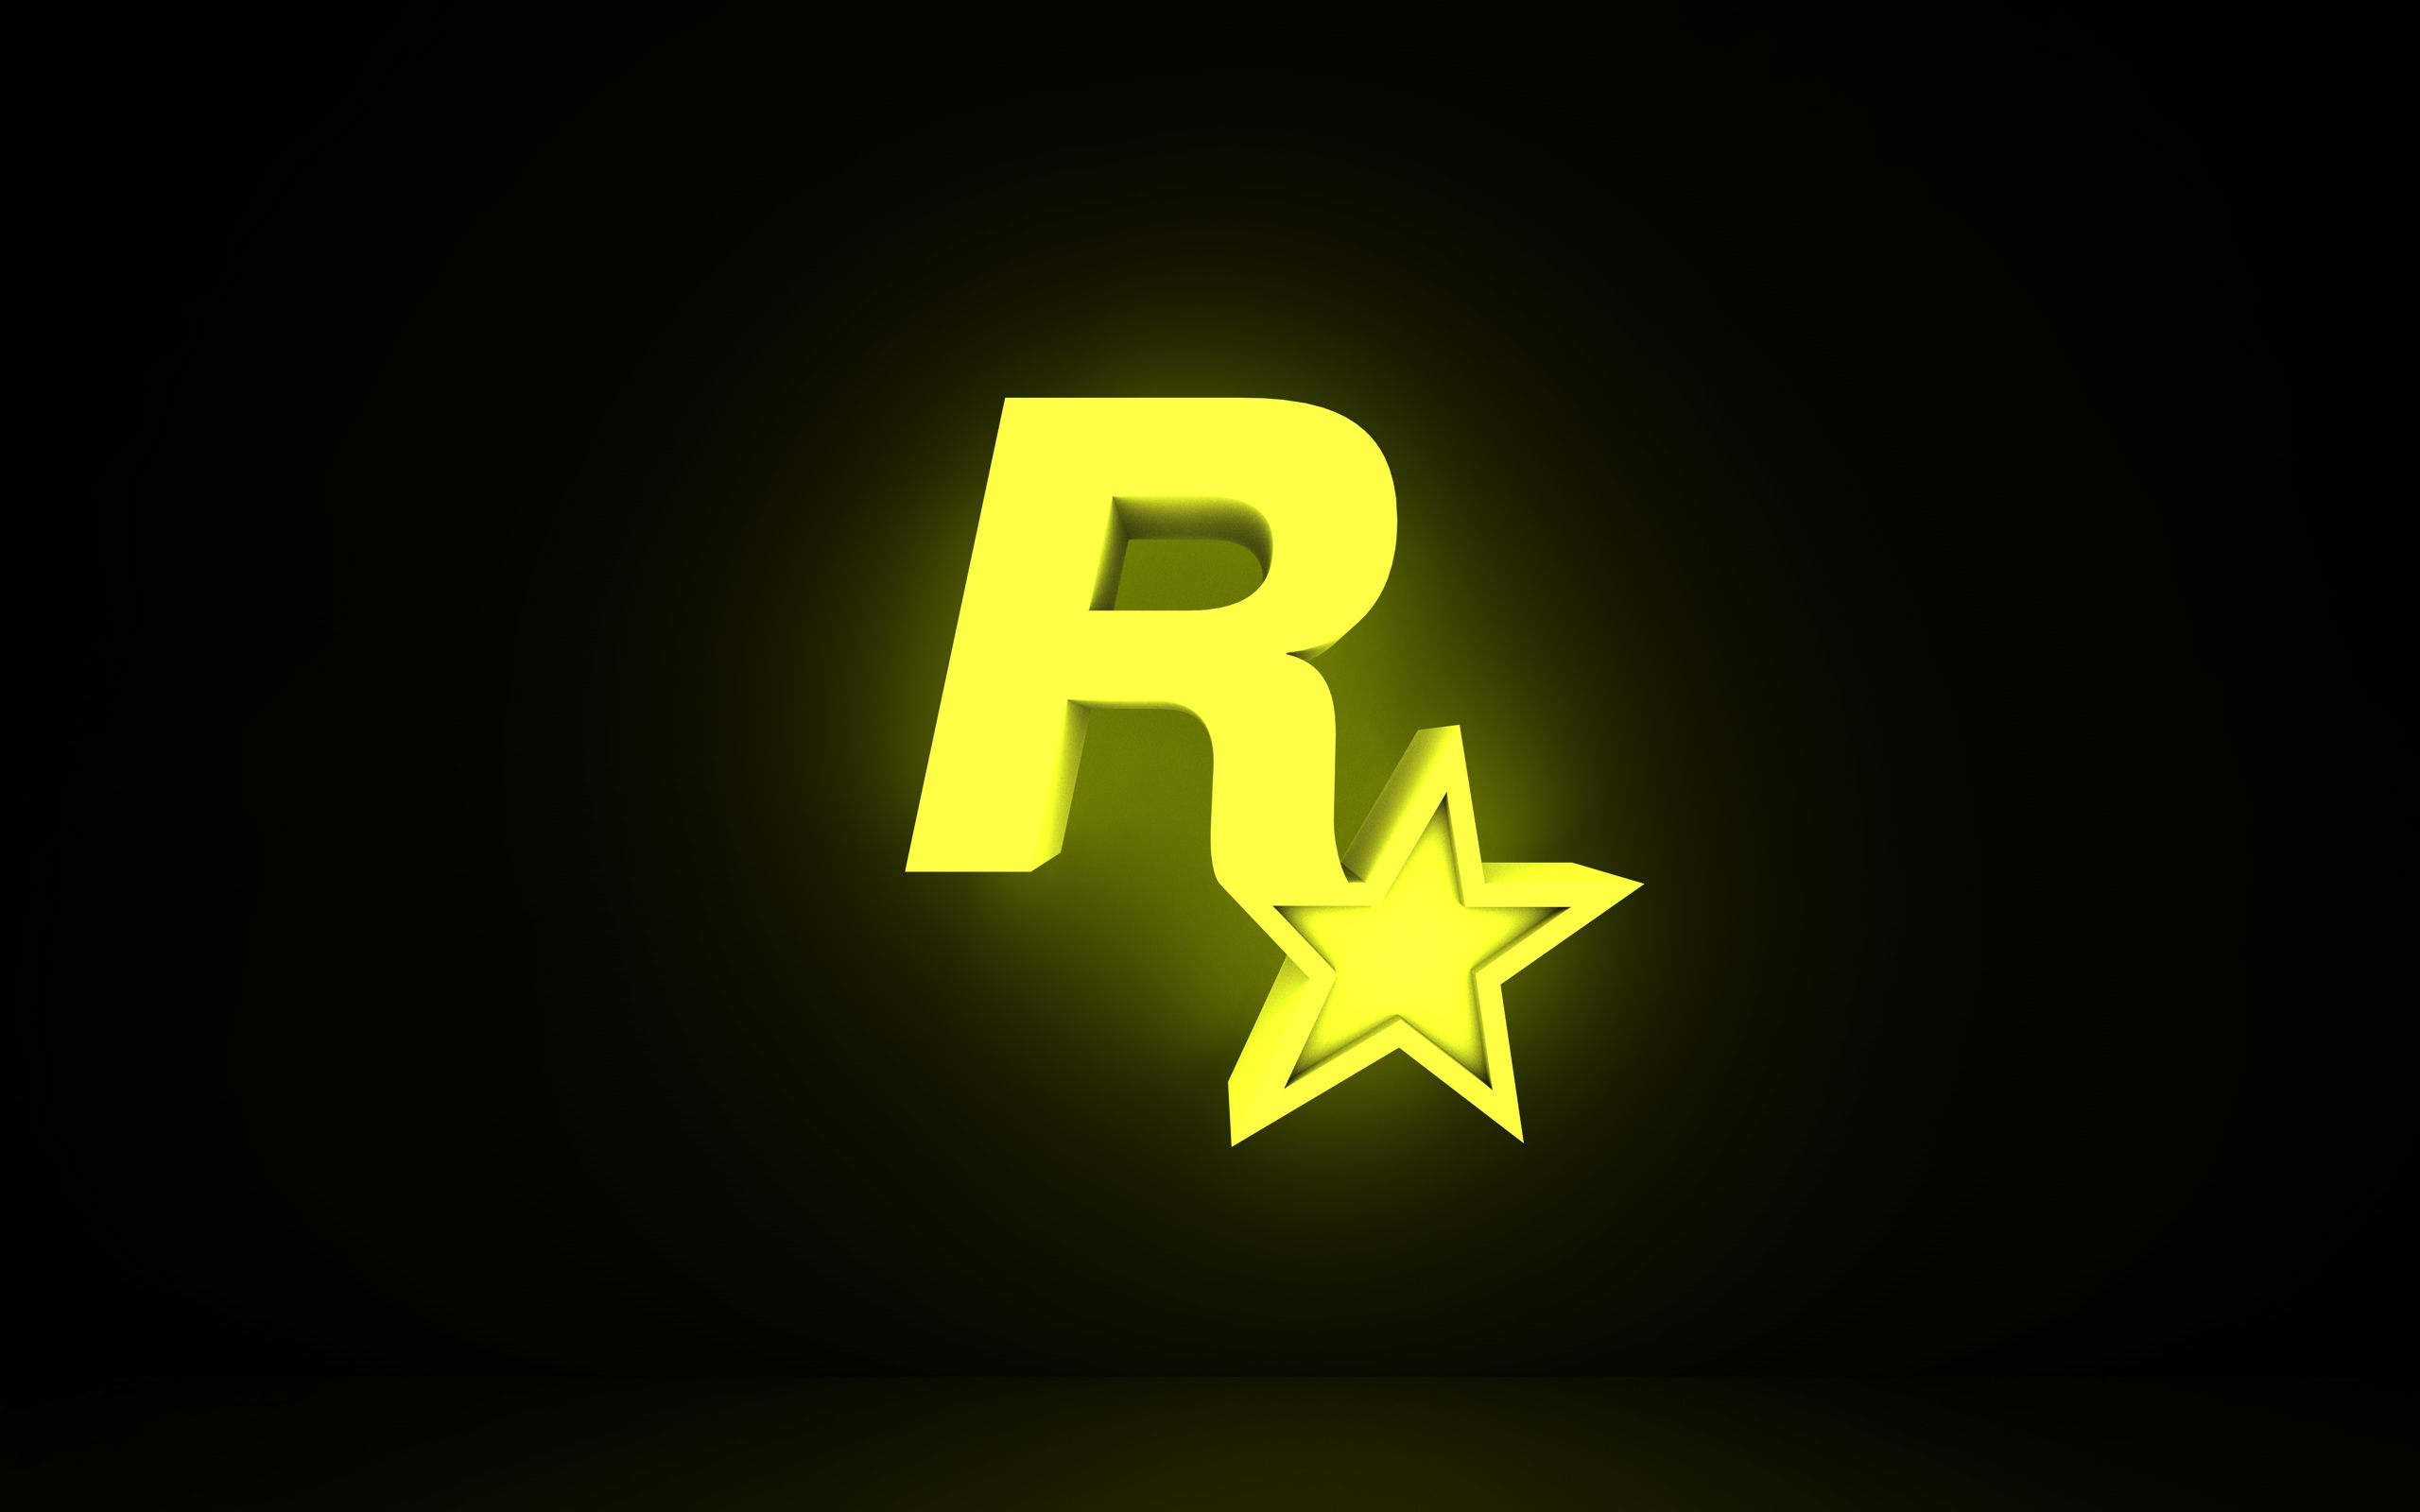 2560x1600 How Rockstar Games drove the Internet crazy in two Red tweets!!! For most game makers hyping up a big-name franch&acirc;&#128;&brvbar; | Rockstar games logo, Rockstar games, Rockstar